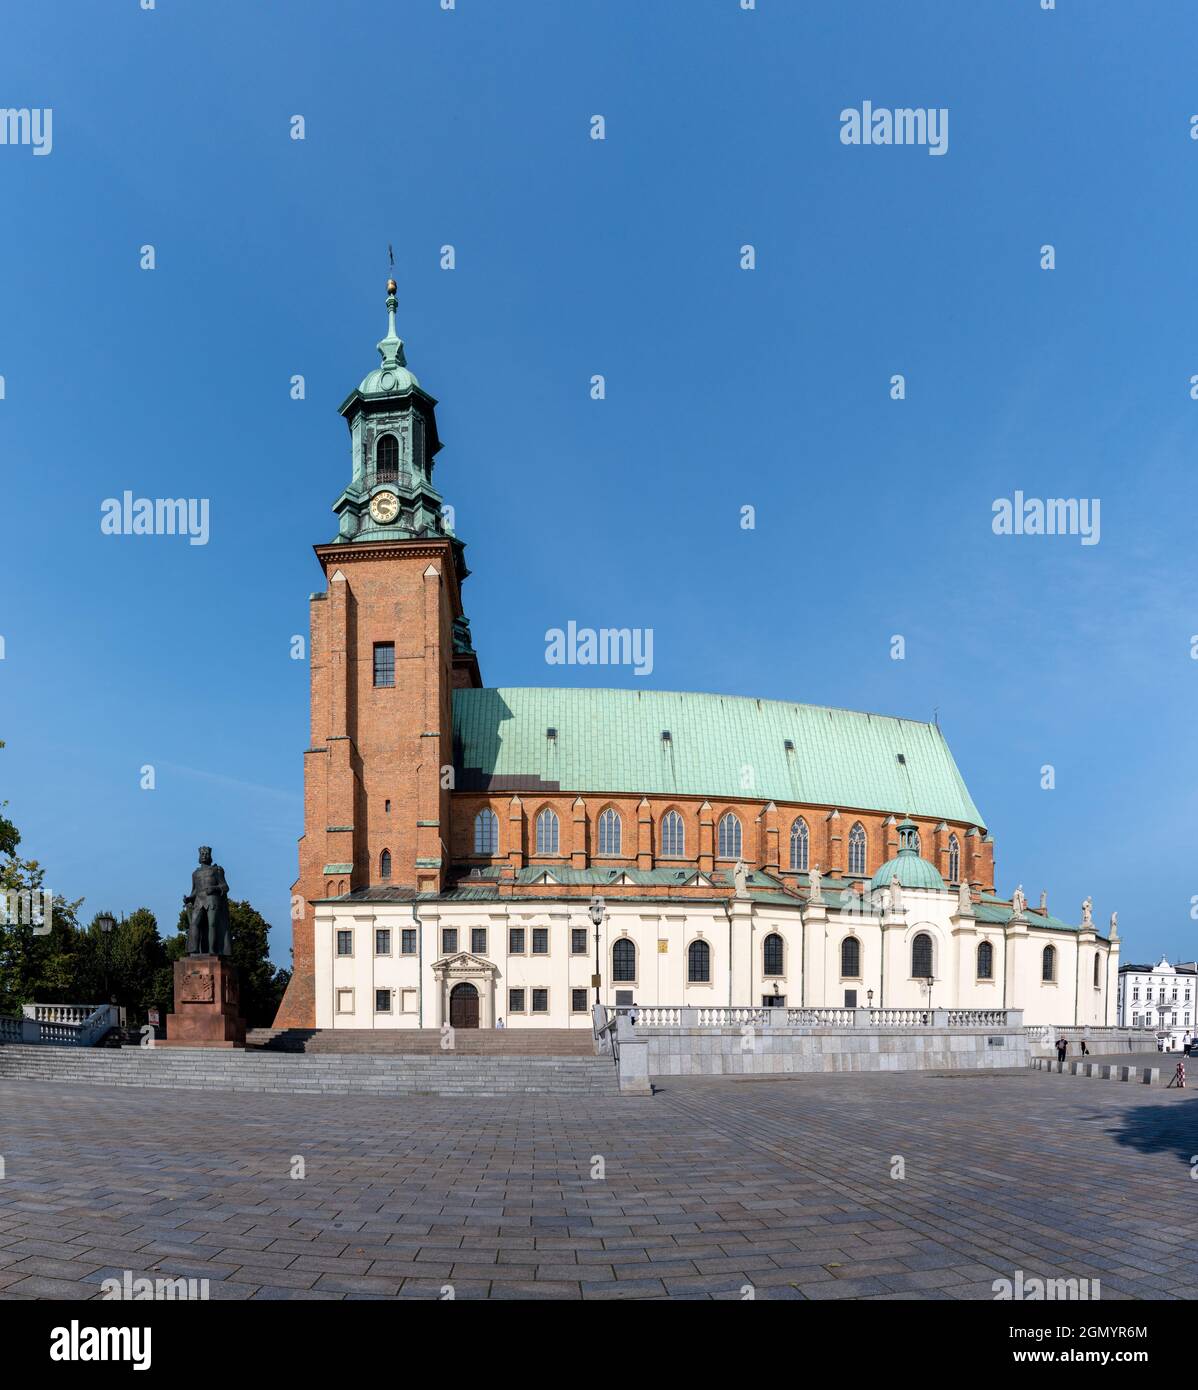 Gniezno, Poland - 7 September, 2021: horizontal view of the Royal Gniezno Cathedral in central Poland Stock Photo